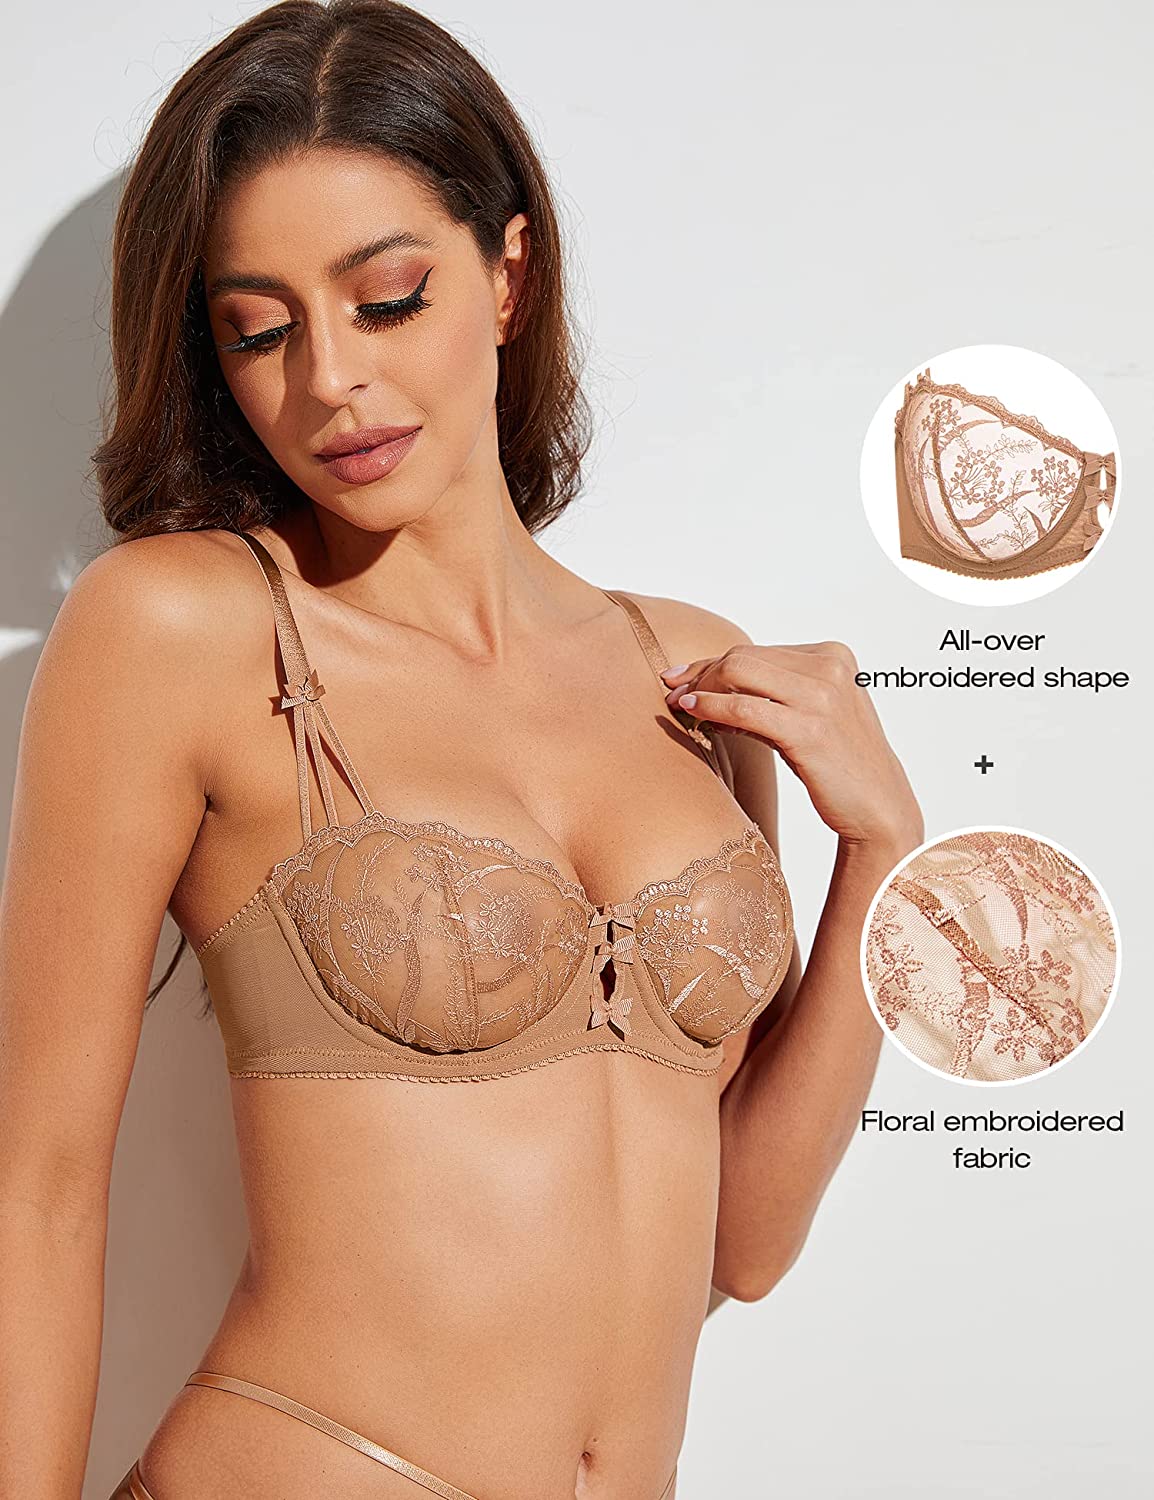 Embroidered Lace Unlined Bra Demi Sheer See Through Underwire Bras –  WingsLove